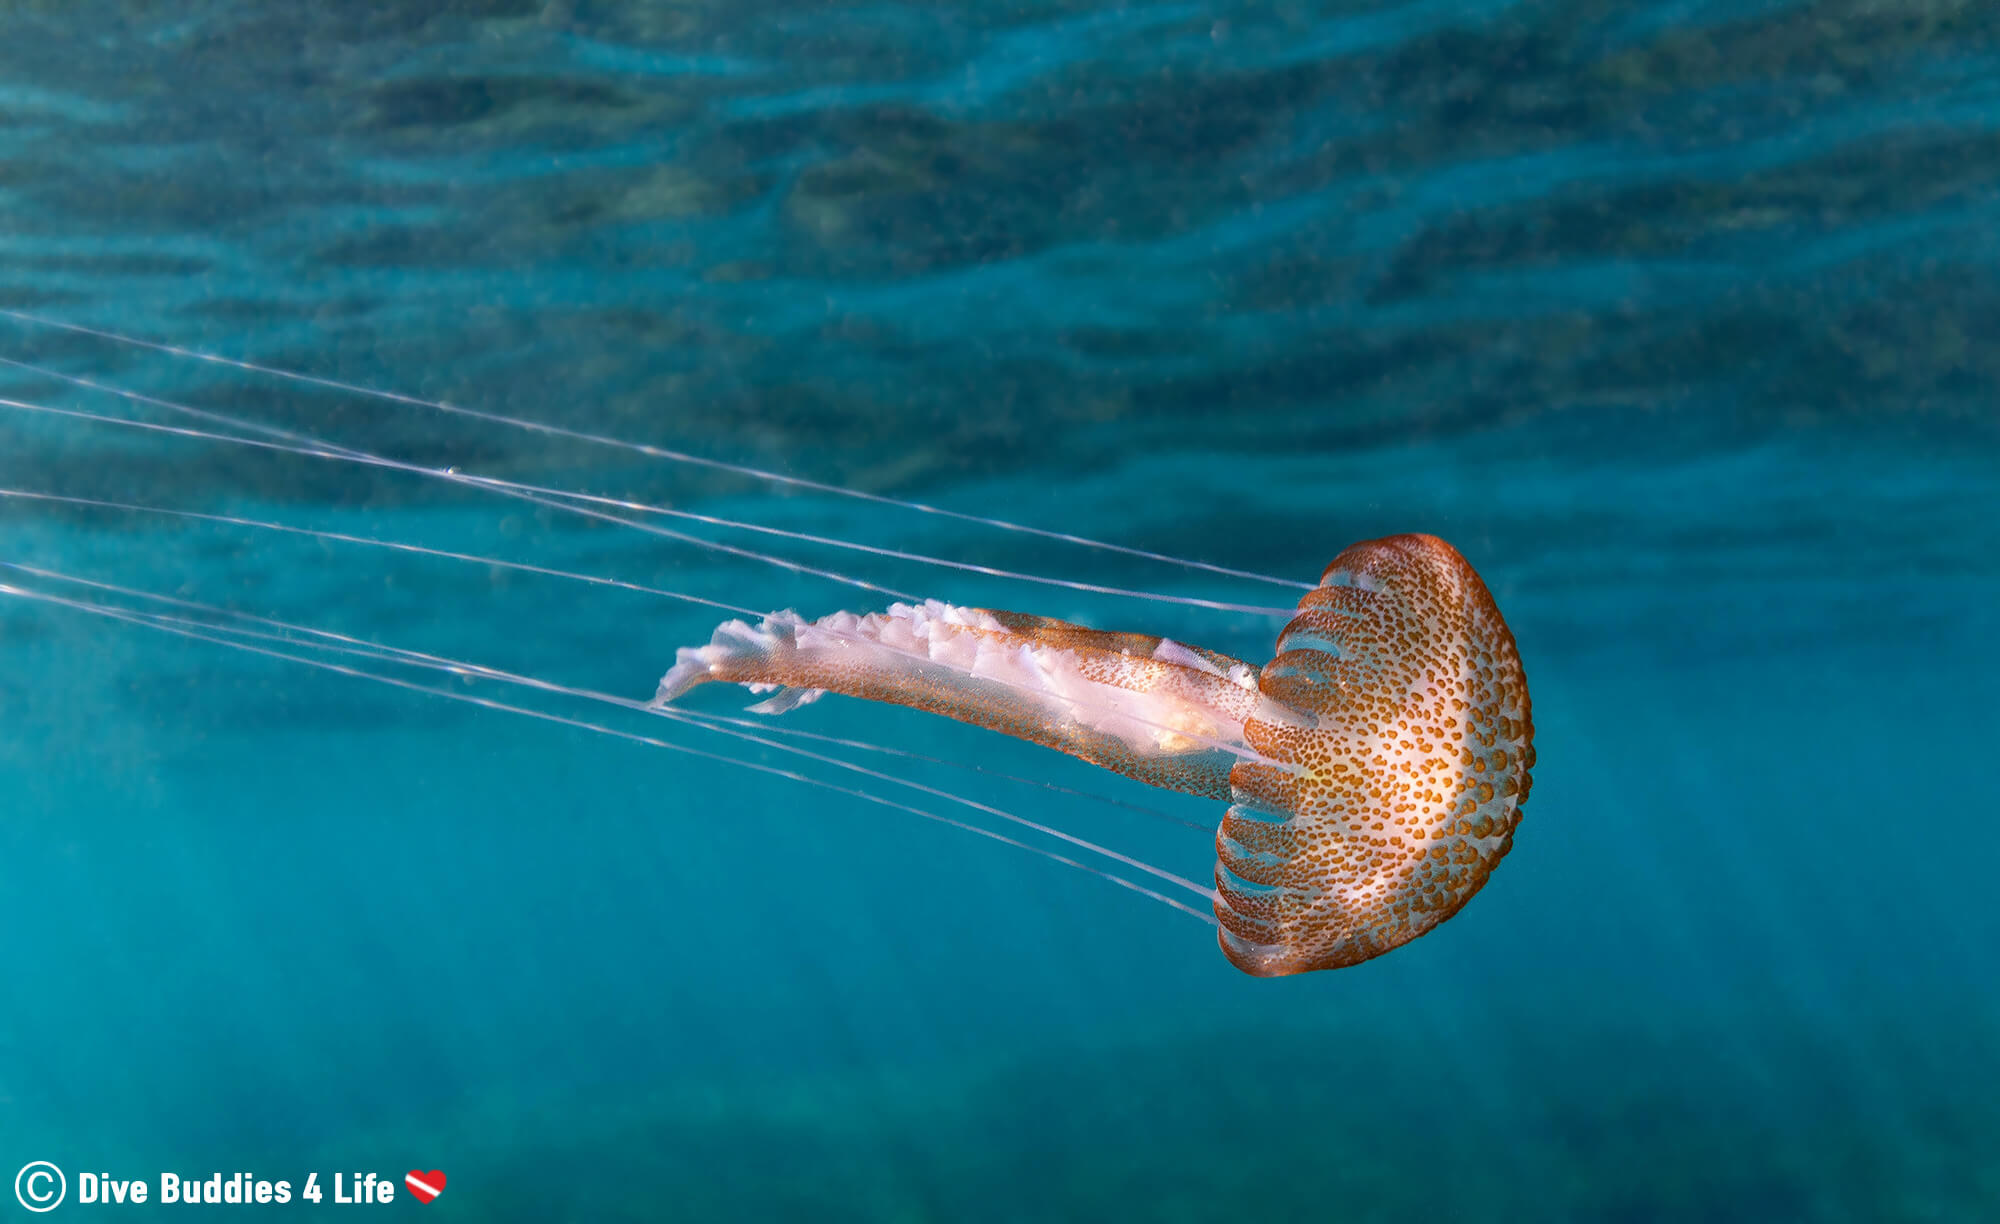 A Brown And White Spotted Jellyfish With Long Tentacle Flowing From The Bell In Spain, Europe